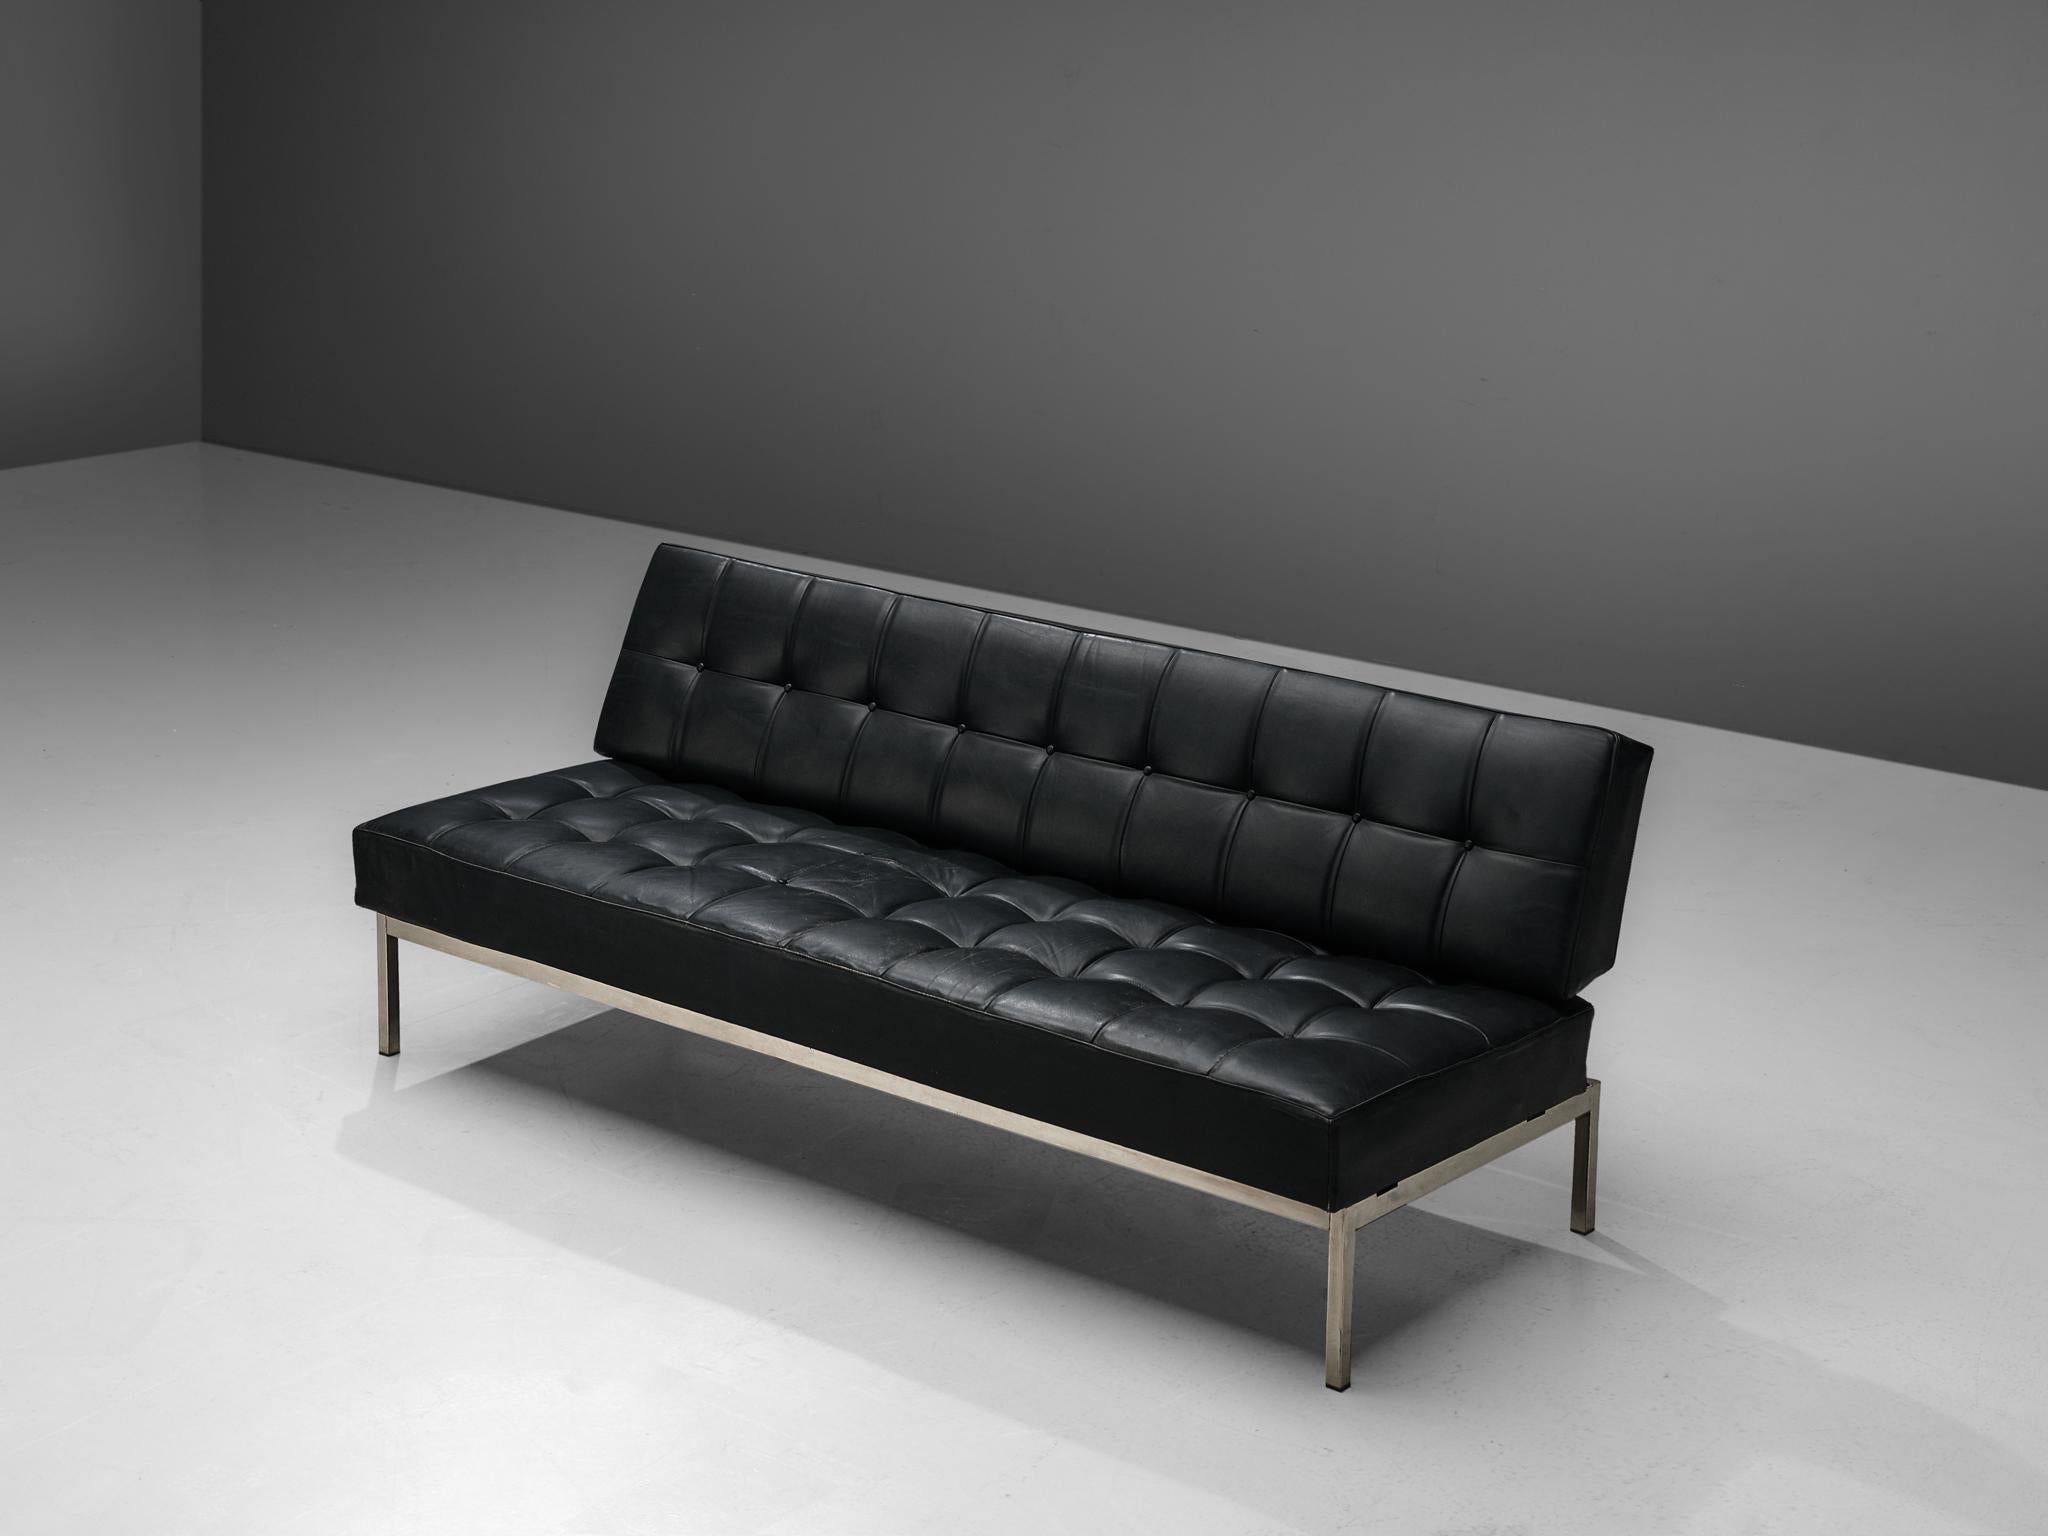 Johannes Spalt 'Constanze' Sofa Daybed in Black Leather and Steel